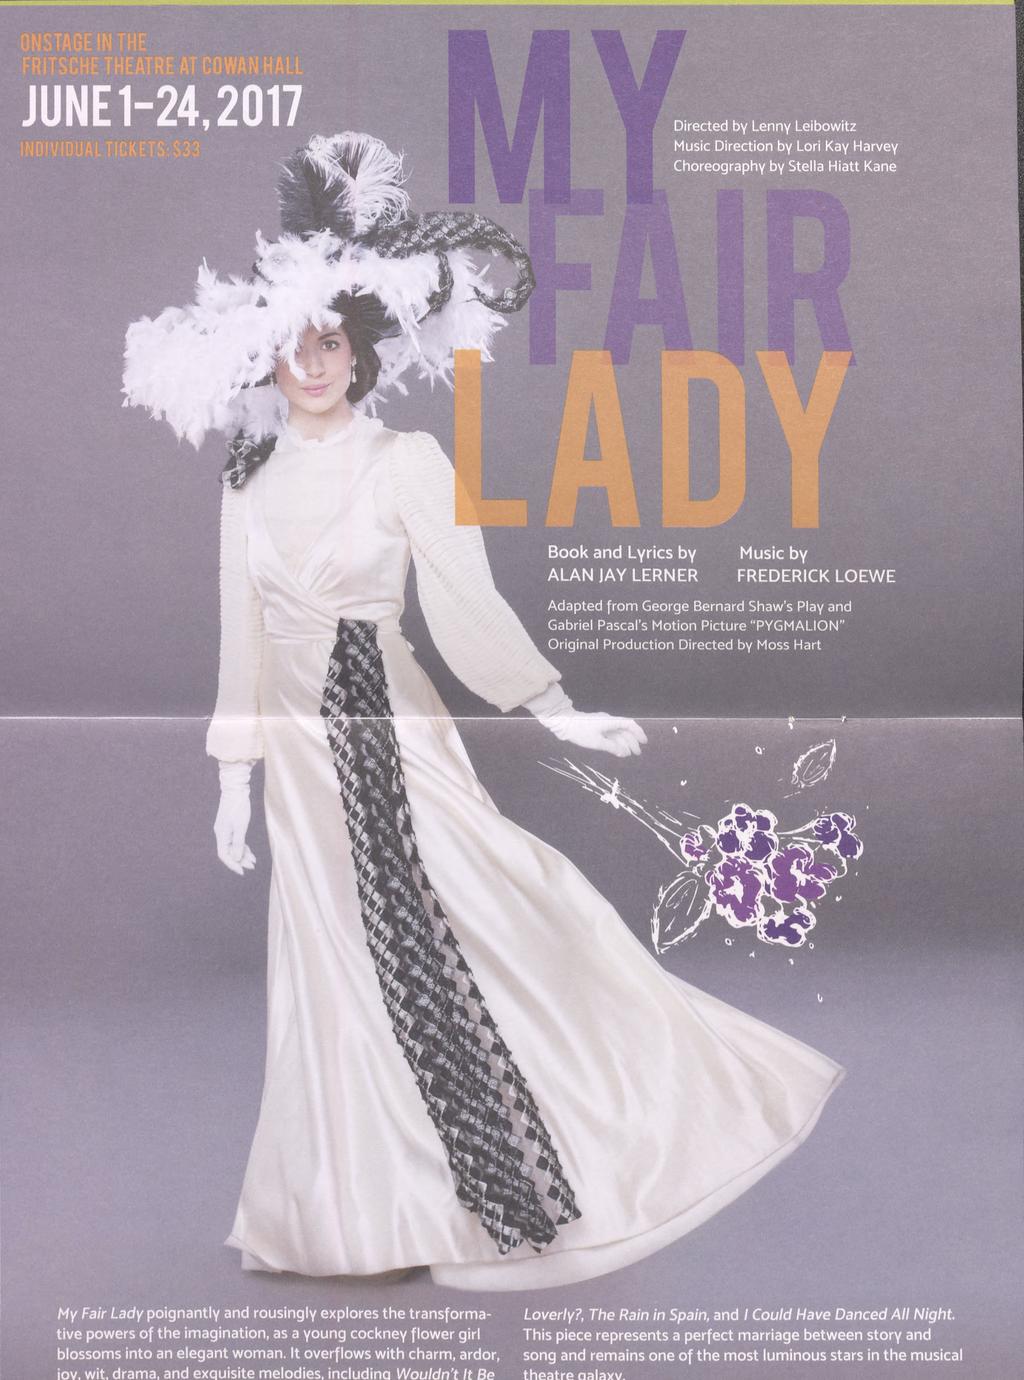 My Fair Lady poignantly and rousingly explores the transformative powers of the imagination, as a young cockney flower girl blossoms into an elegant woman. It overflows with charm, ardor, iov.